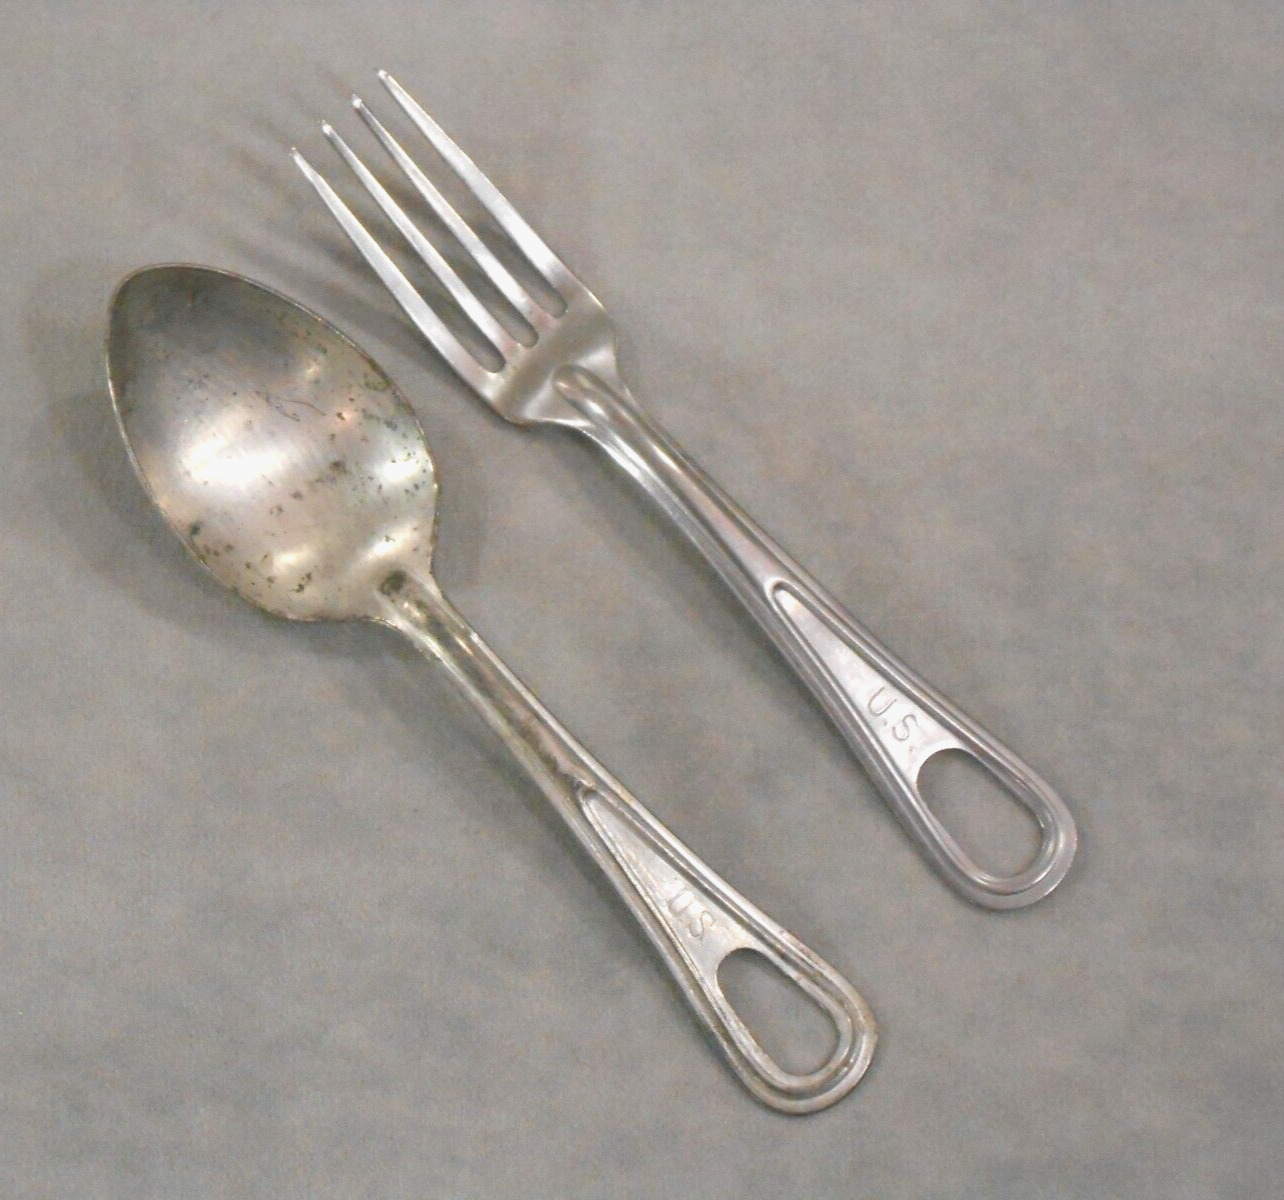 Vintage 1944 WWII Military Silverware US Spoon Fork Collectible Field Gear